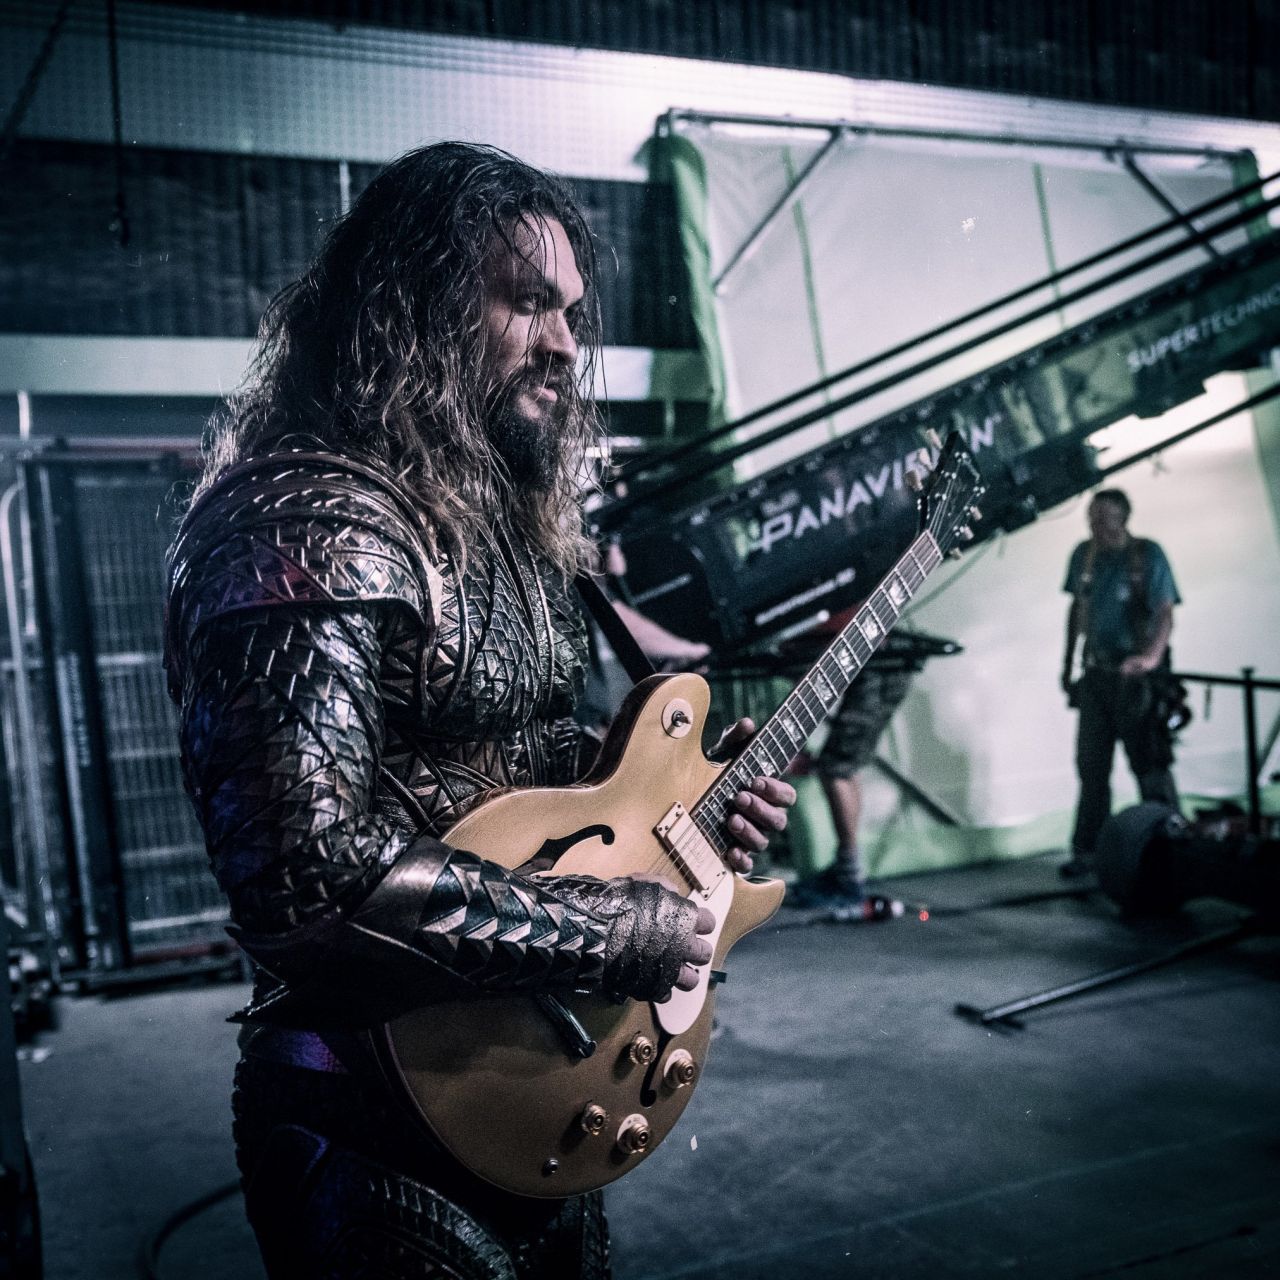 Take A Look At Aquaman In The New Justice League Set Photo